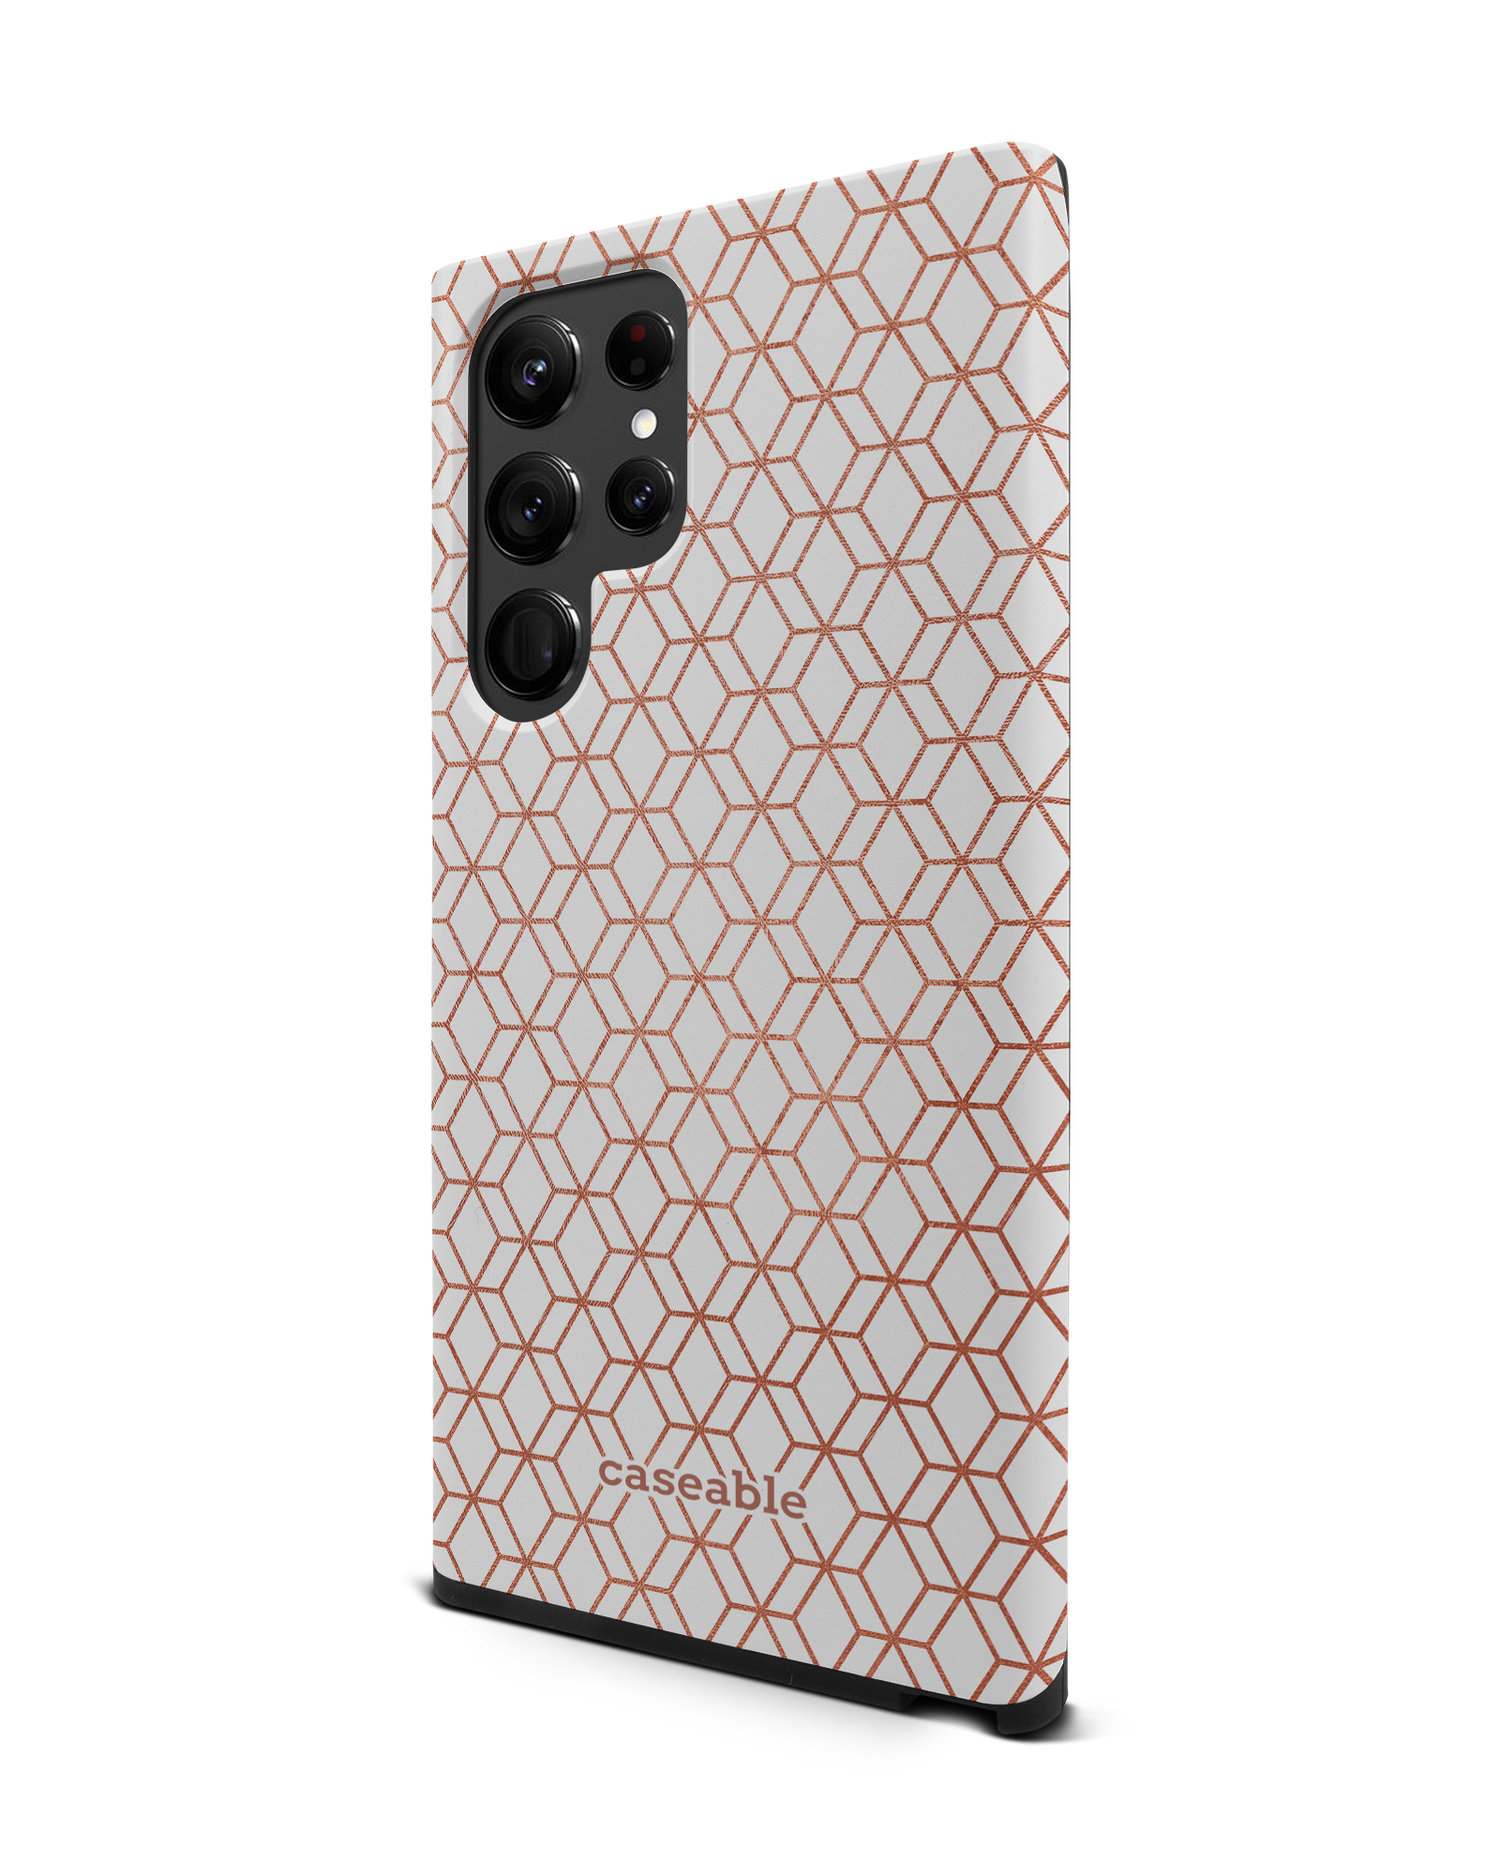 Morning Pattern Premium Phone Case Samsung Galaxy S22 Ultra 5G: View from the right side